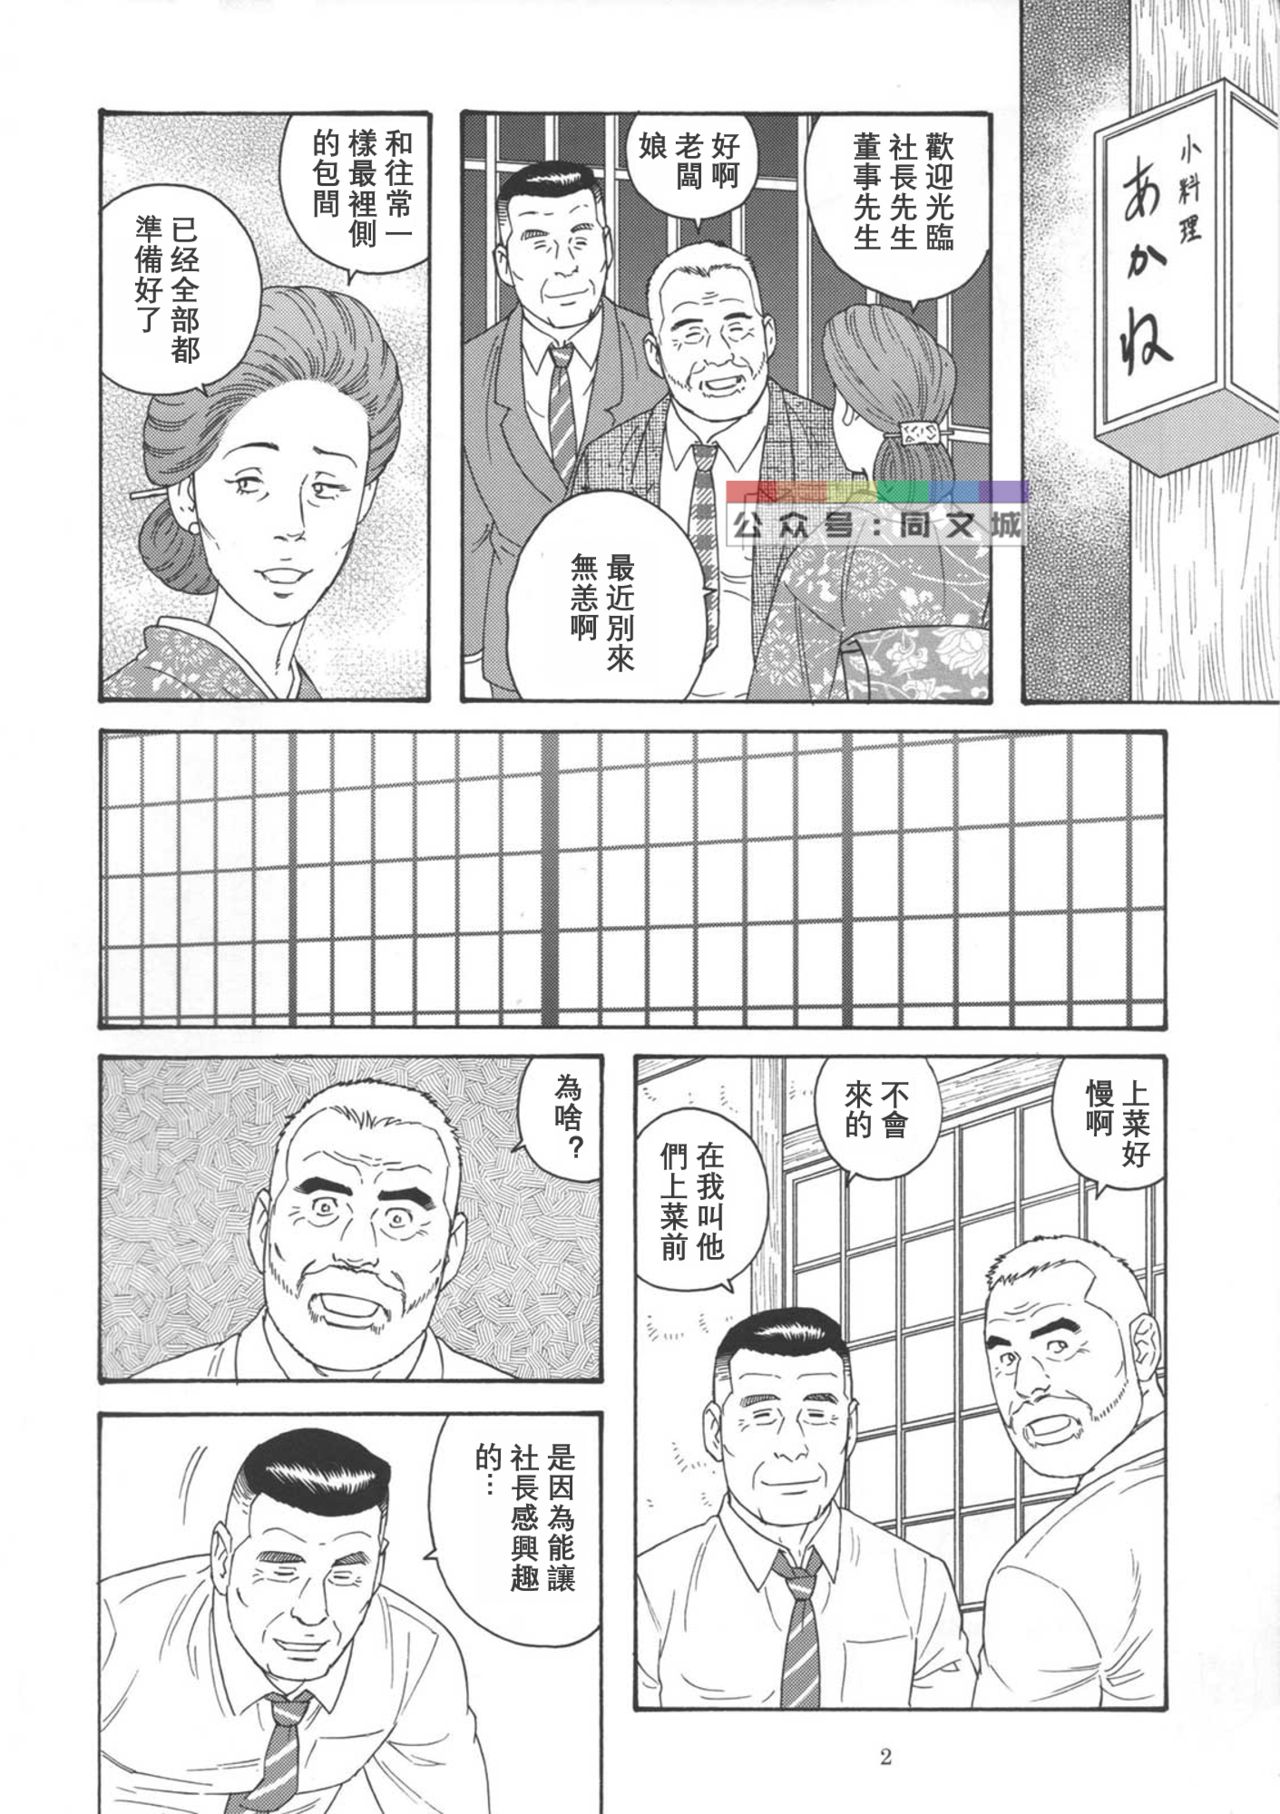 [Tagame Gengoroh] The Loan [chinese] 田亀源五郎_融資